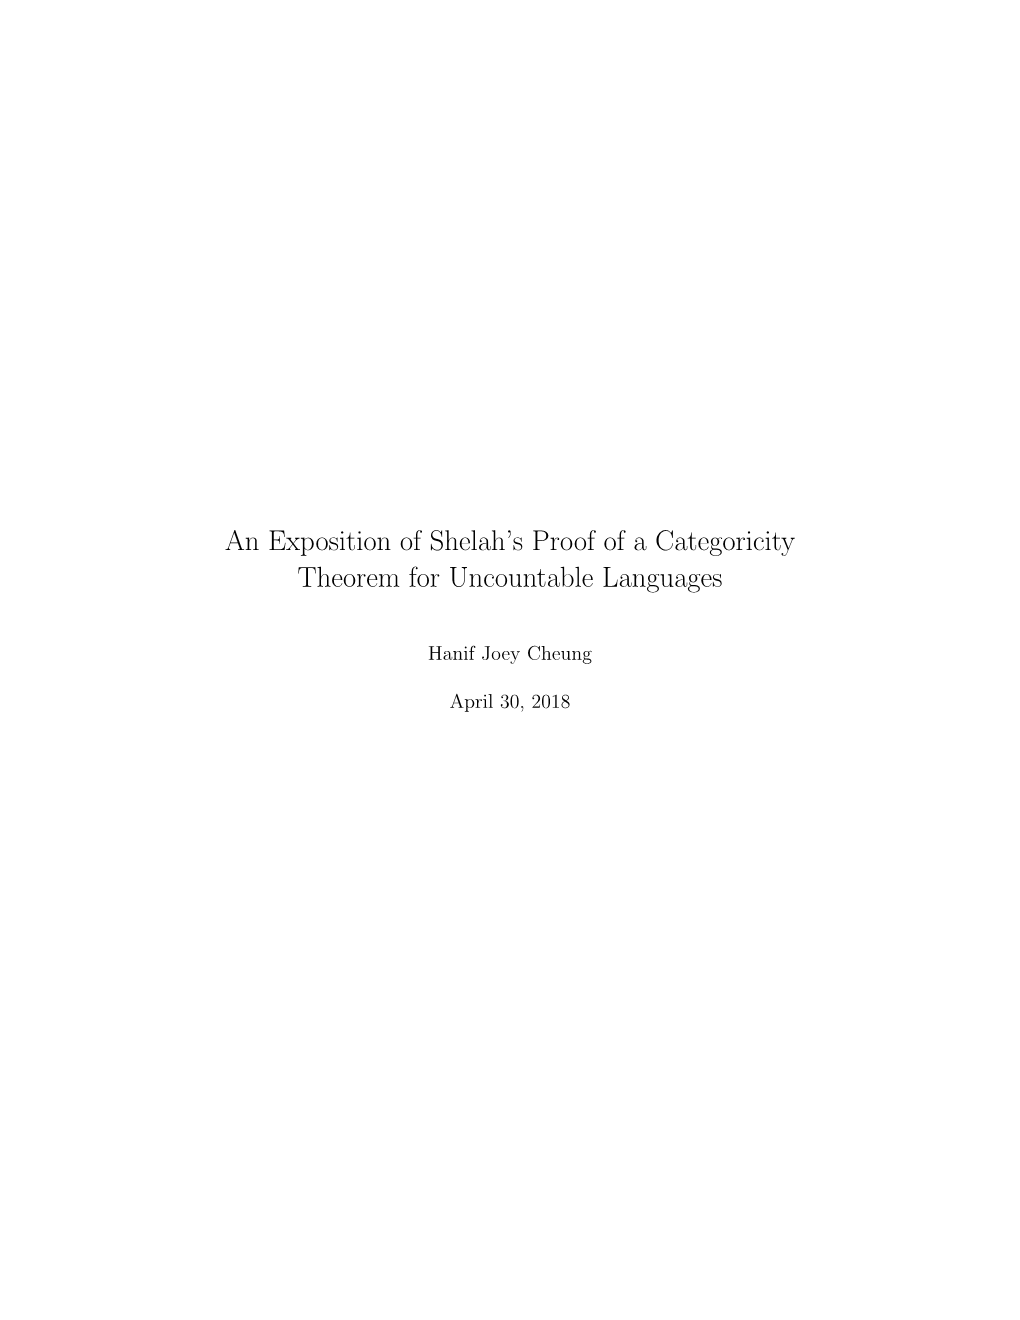 An Exposition of Shelah's Proof of a Categoricity Theorem For